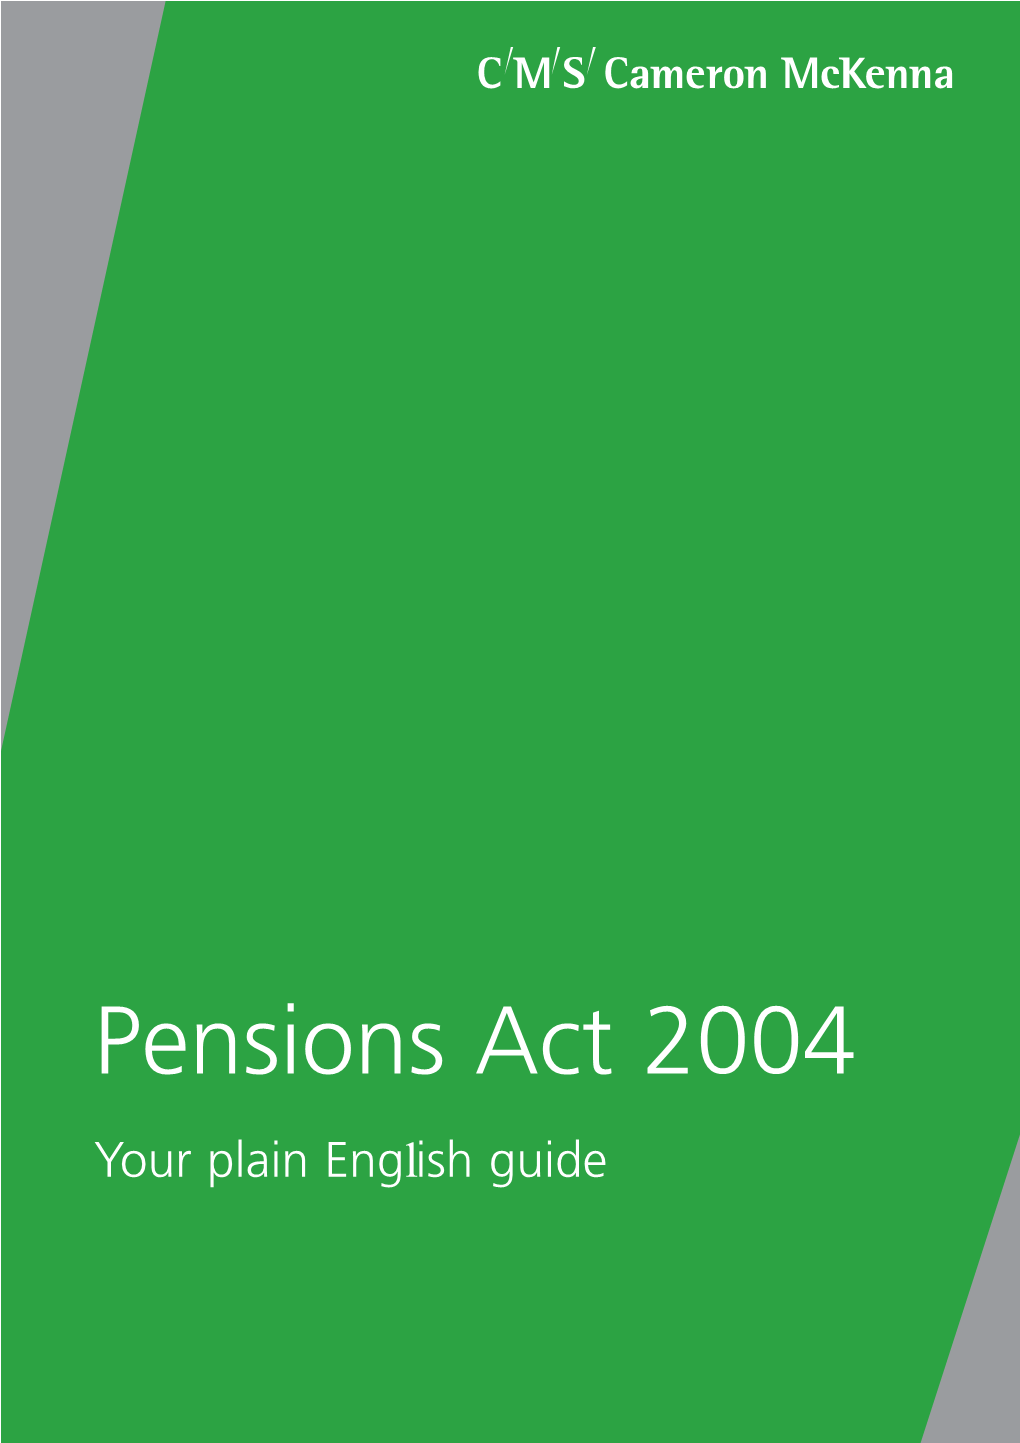 Plain English Guide to the Pensions Act 2004